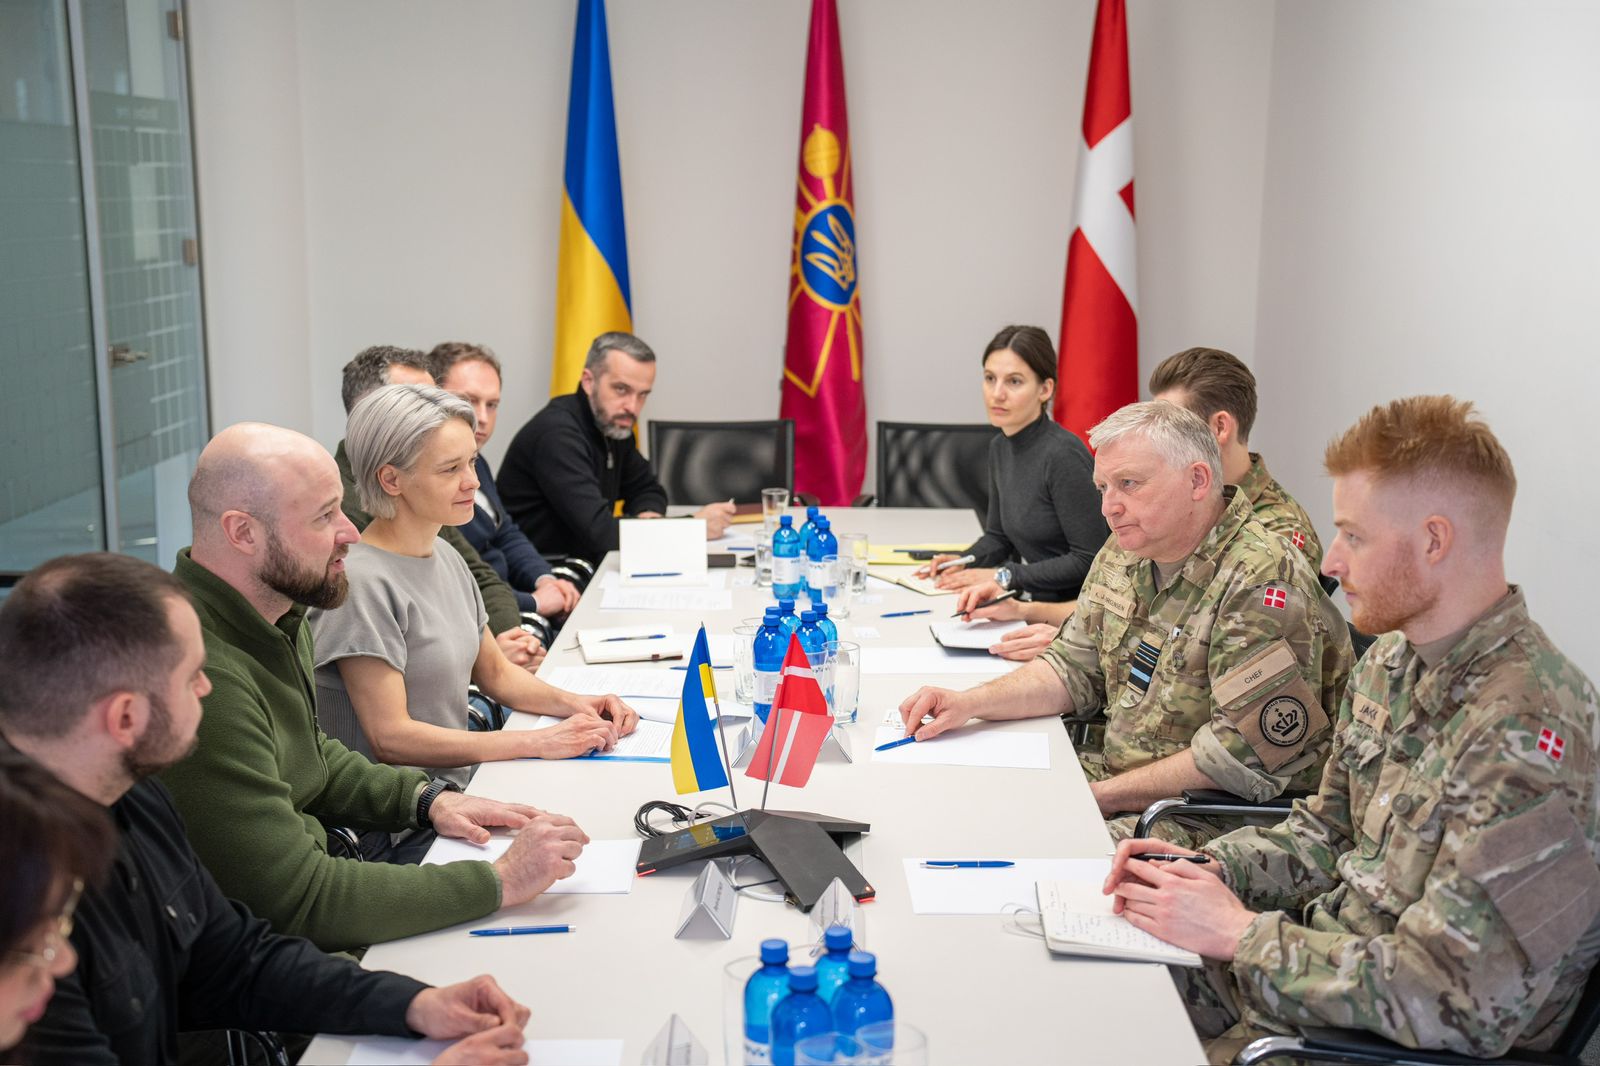 The Defense Procurement Agency has signed a Memorandum with the Procurement and Logistics Organization of the Ministry of Defense of Denmark (DALO)